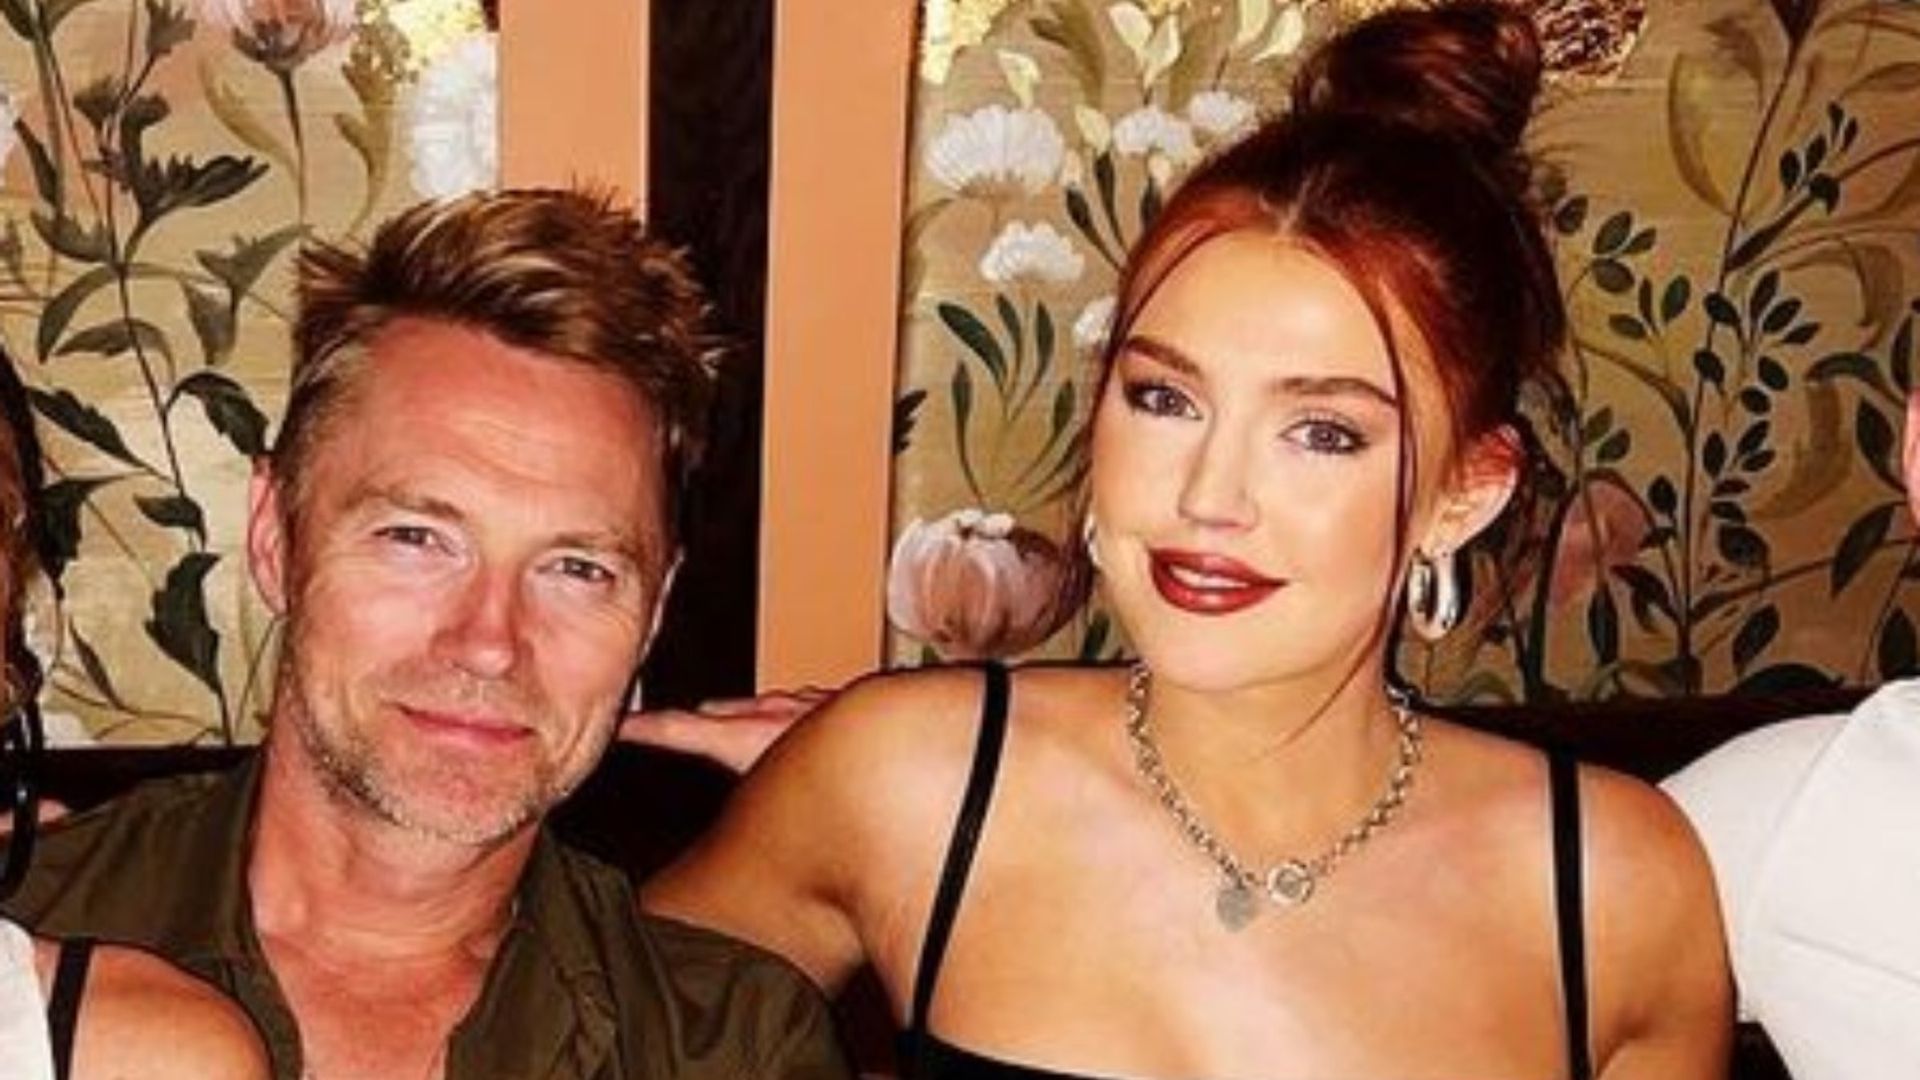 Is Ronan Keating's daughter going on Love Island?